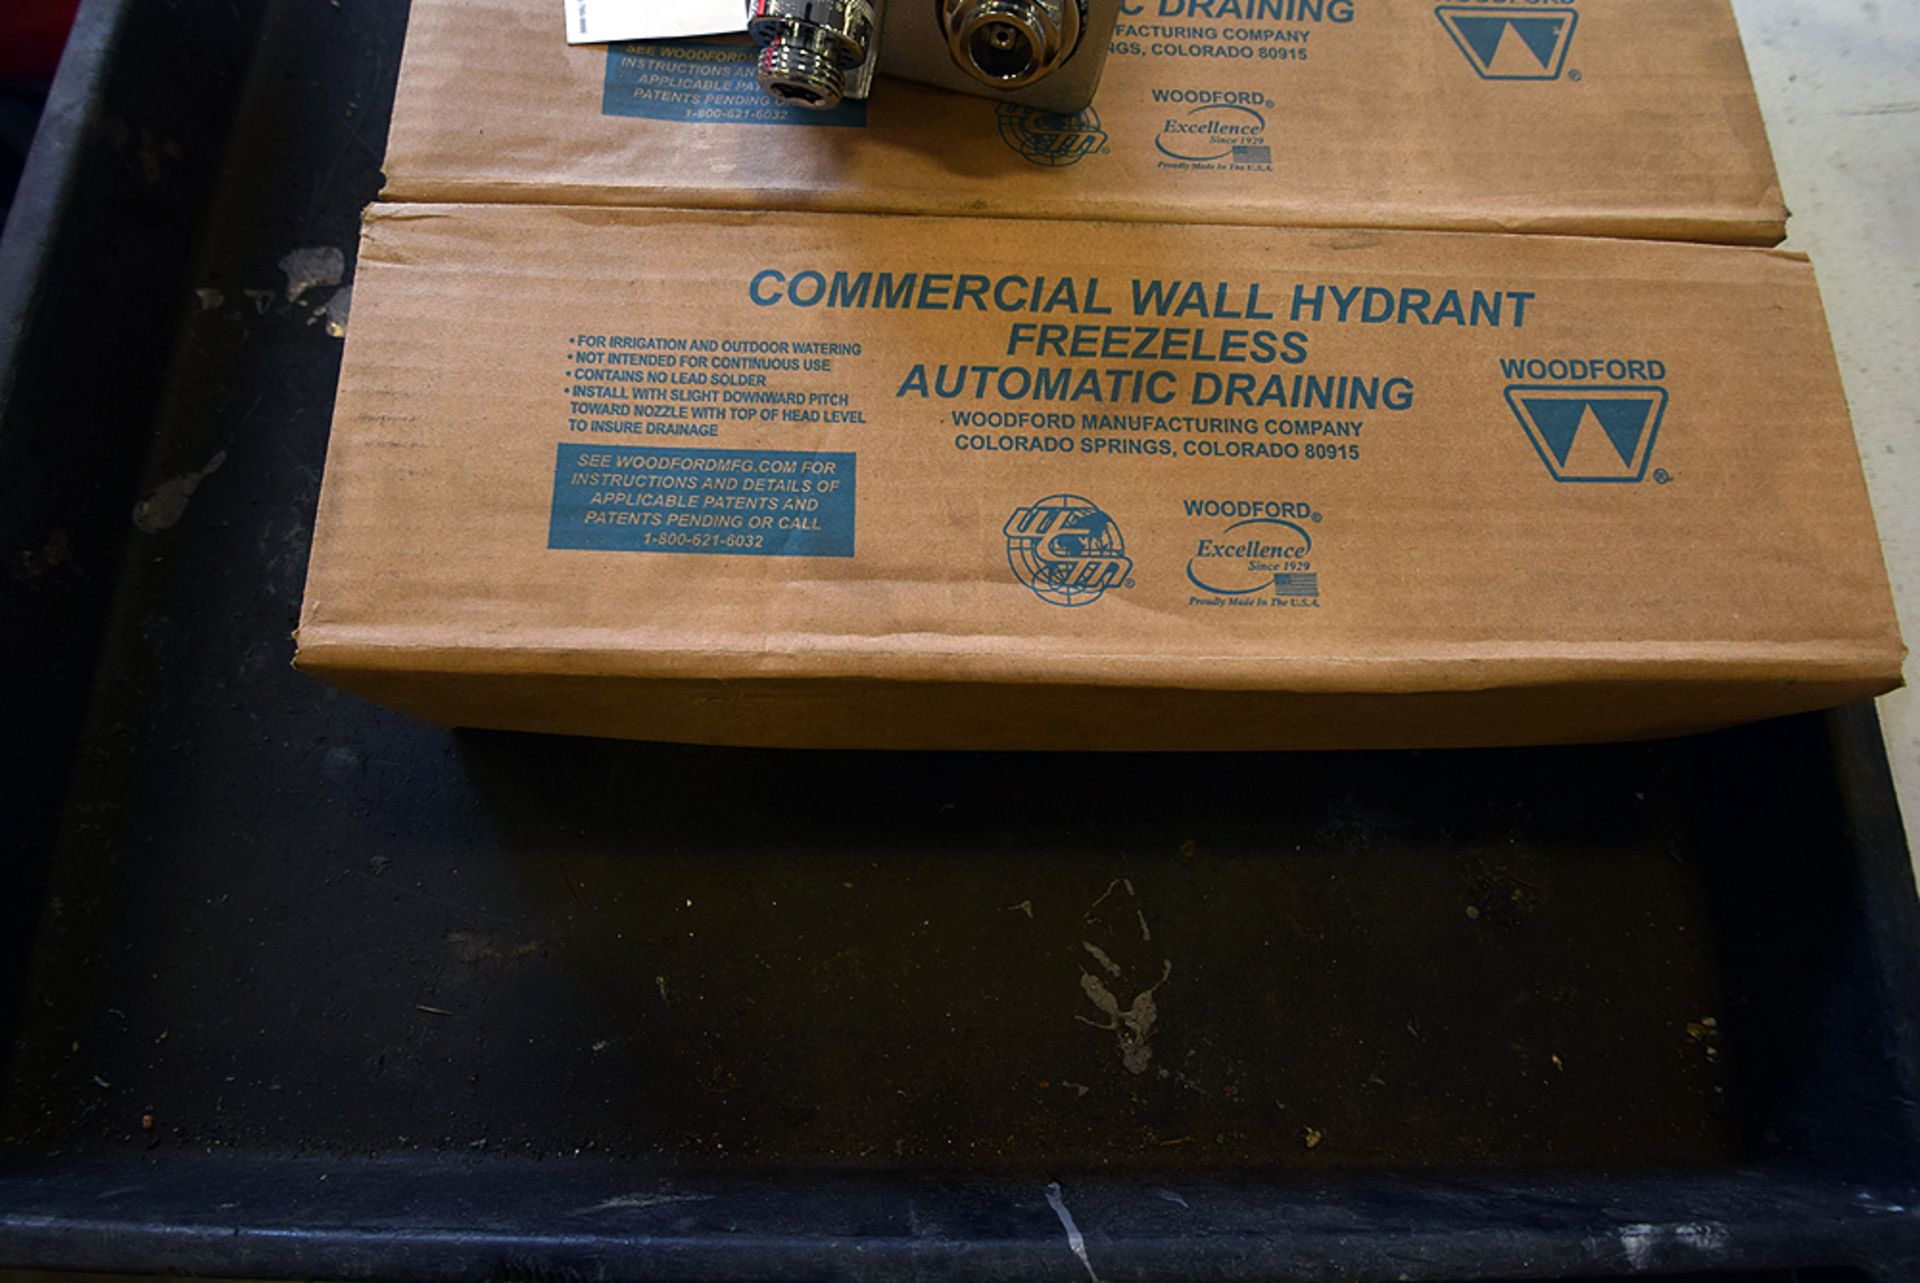 WoodFord Freezeless Commercial Wall Hydrant